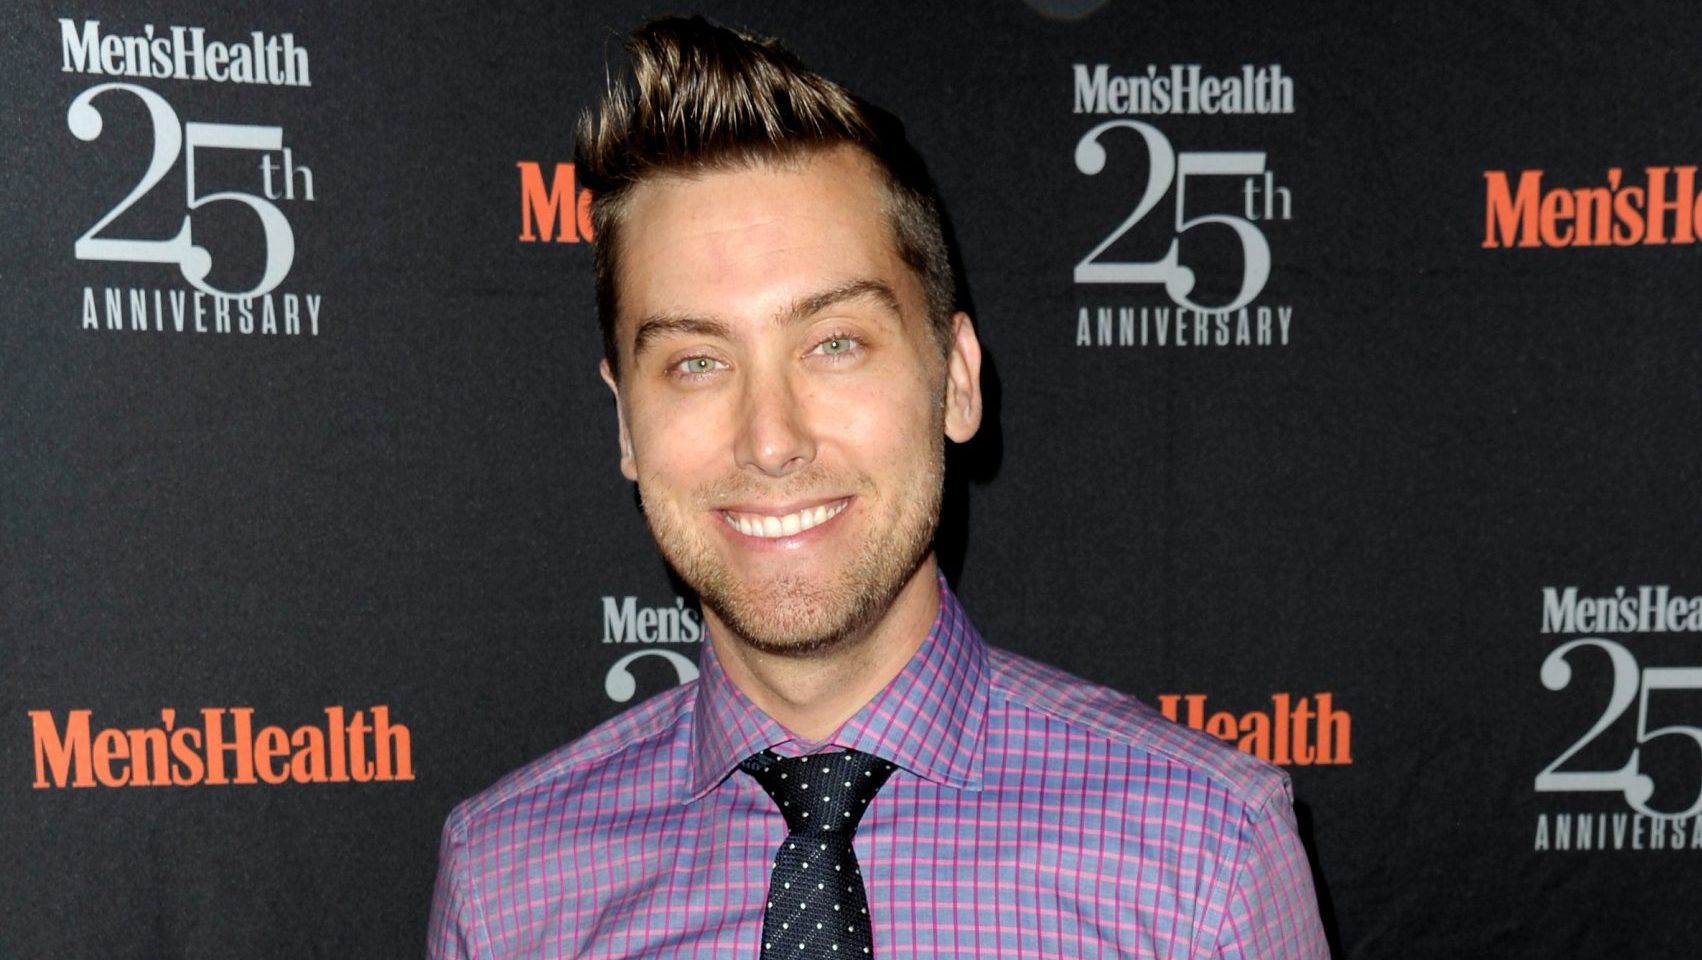 Lance Bass first experienced knee and shoulder pain. Photo by Dave Kotinsky/Getty Images for Men's Health Magazine